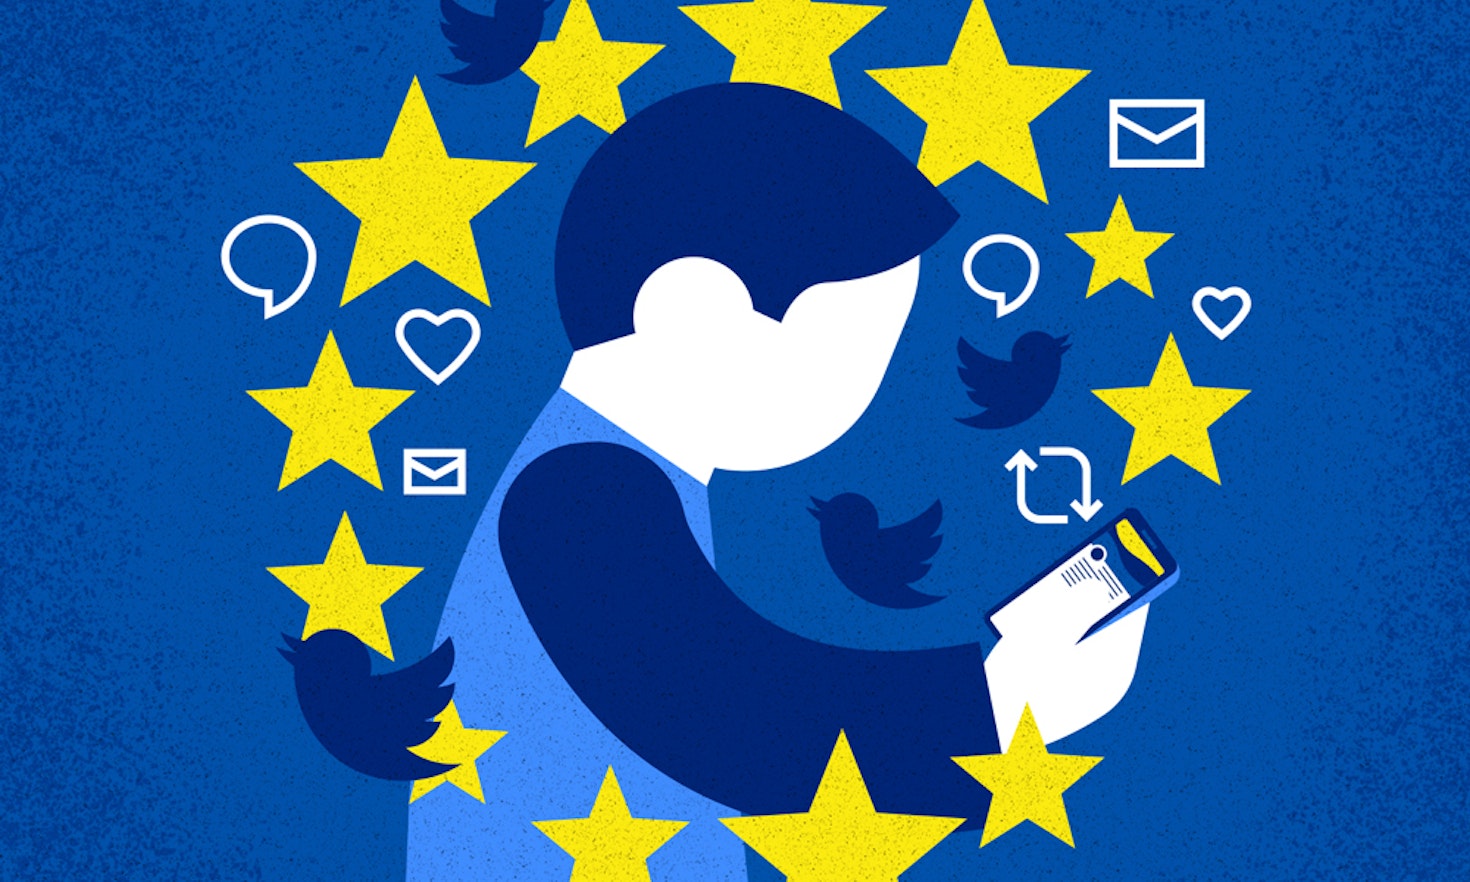 EU politics on Twitter. Which role for the EU digital influencers?